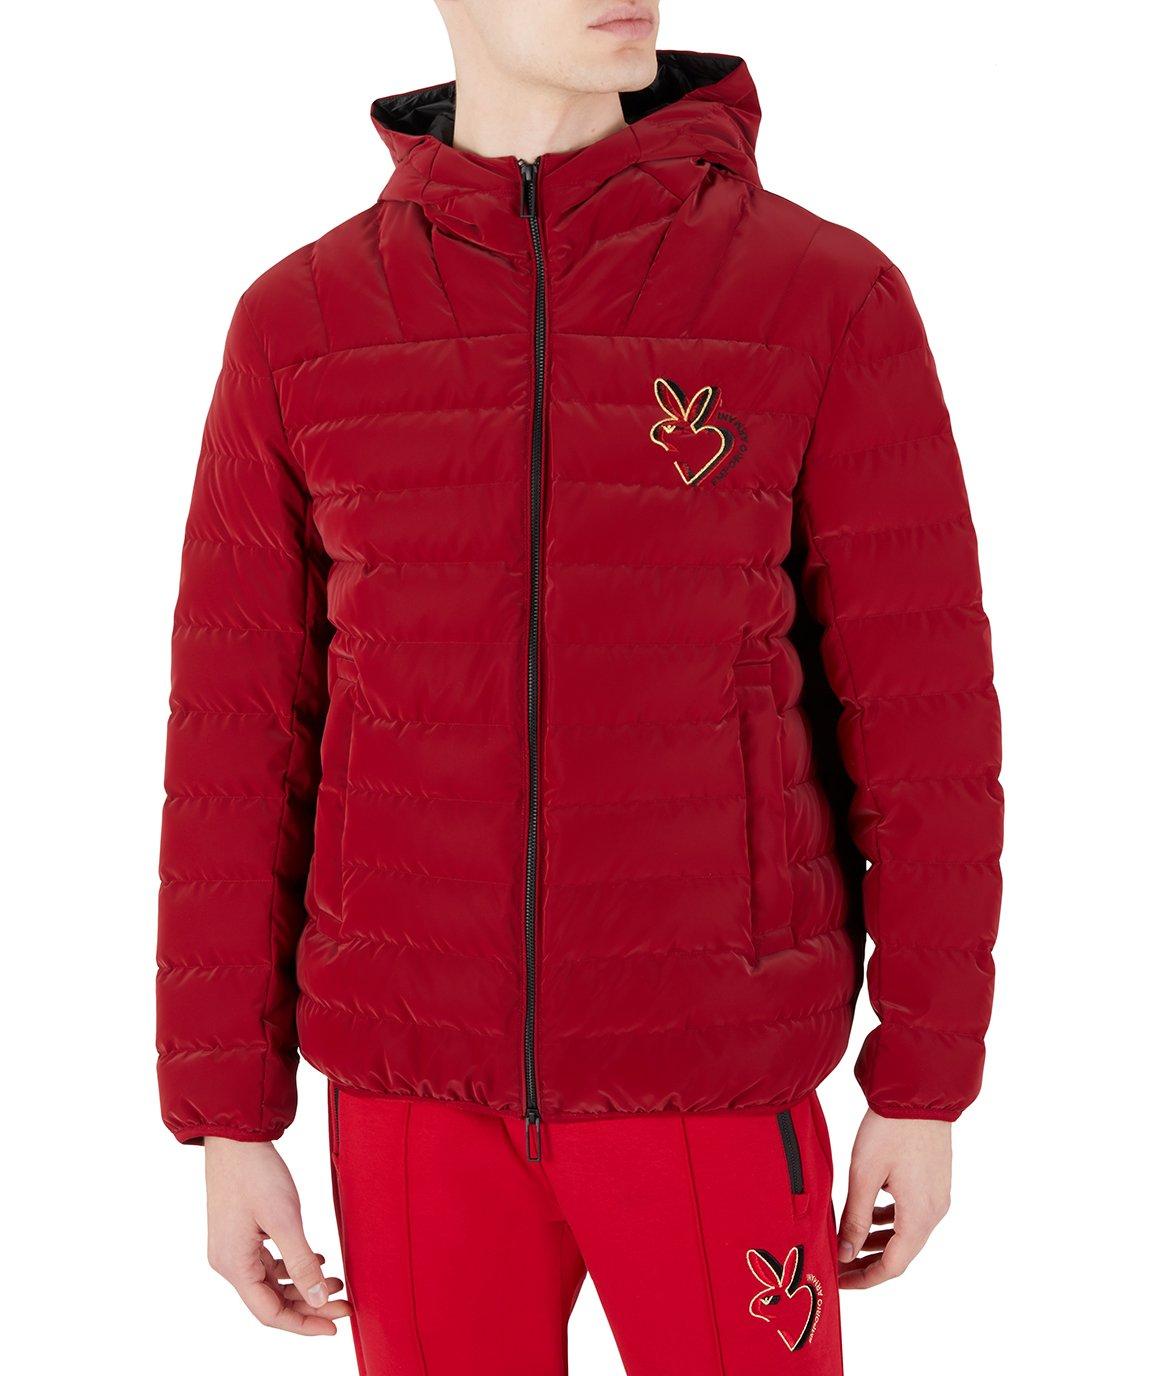 Lunar New Year Quilted Down Jacket image 0